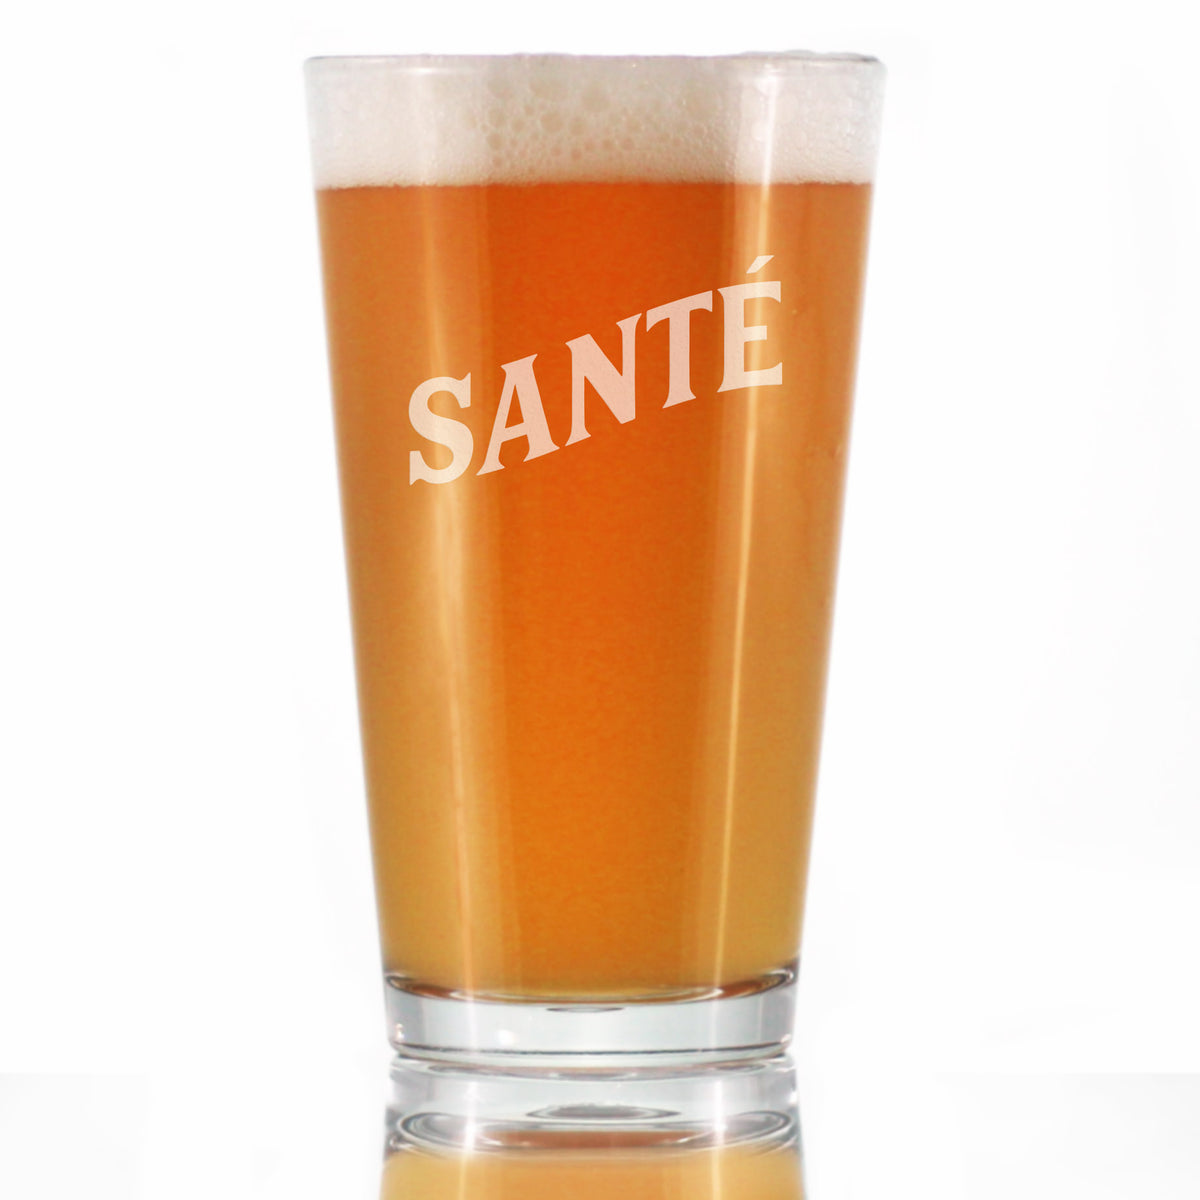 Sante - French Cheers - Fun Pint Glass for Beer - Cute France Themed Gifts or Party Decor for Men and Women - 16 oz